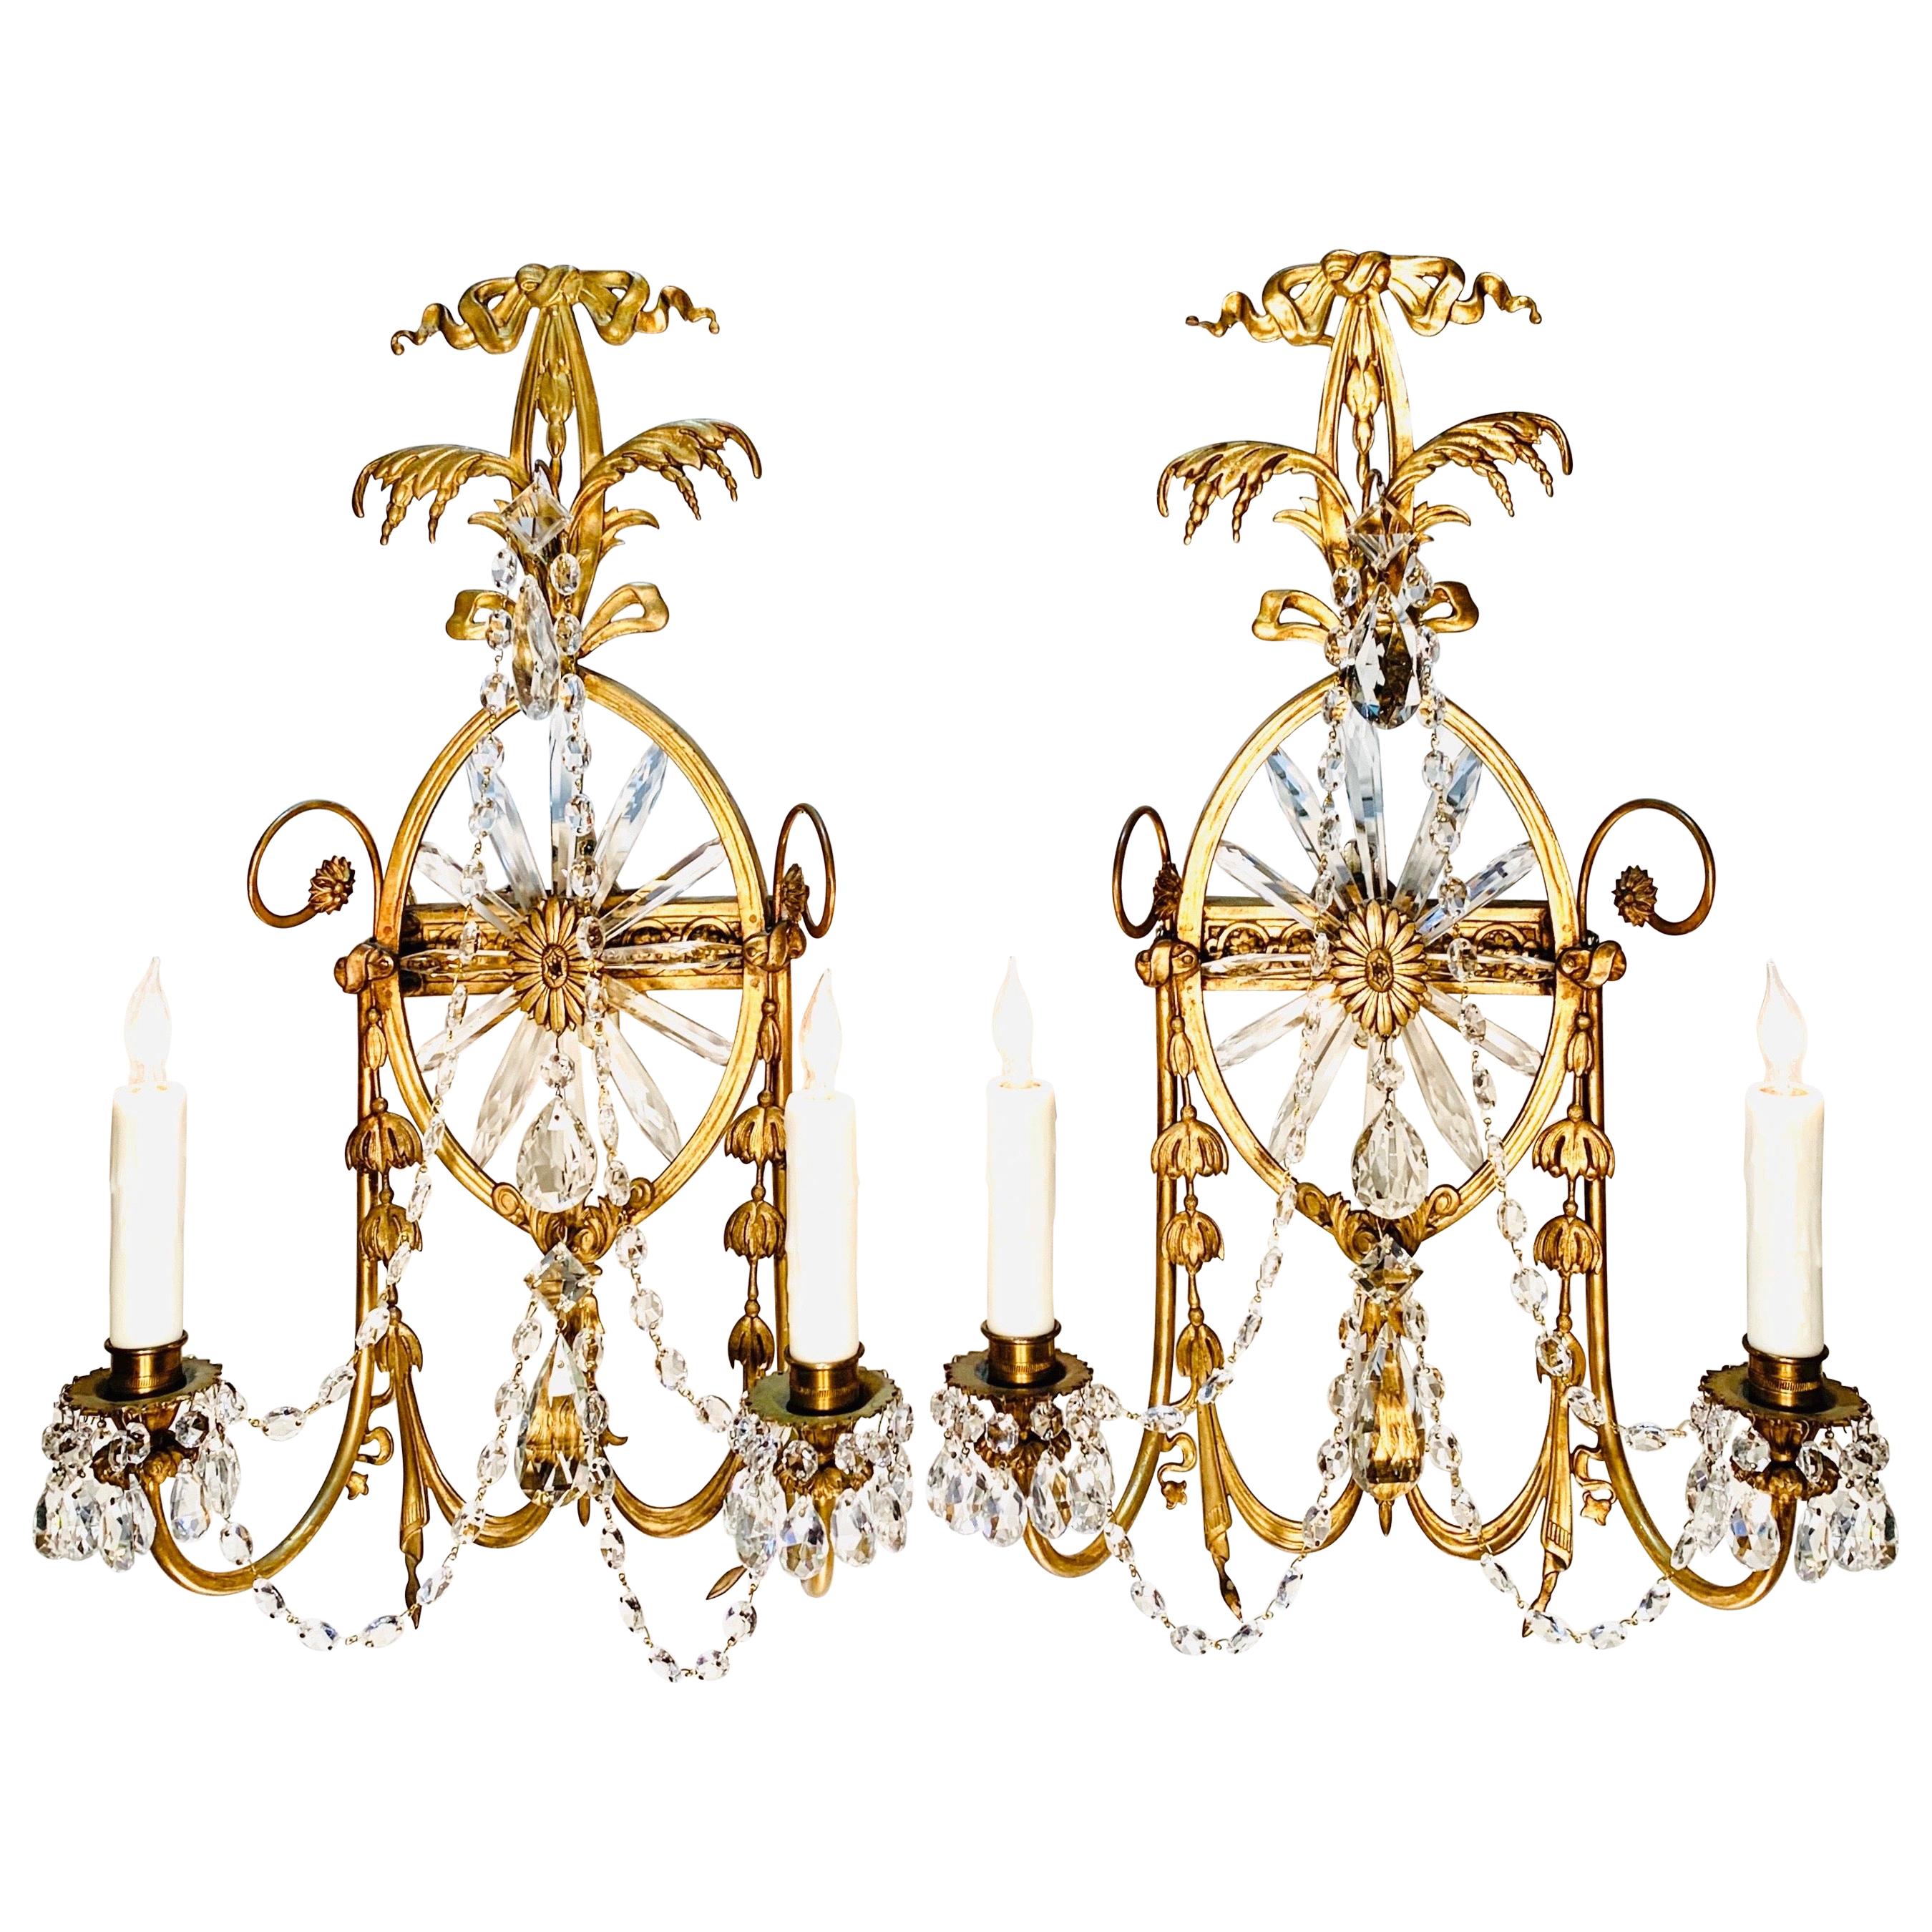 Classical Regency Style Pair of Caldwell Sconces, circa 1920s